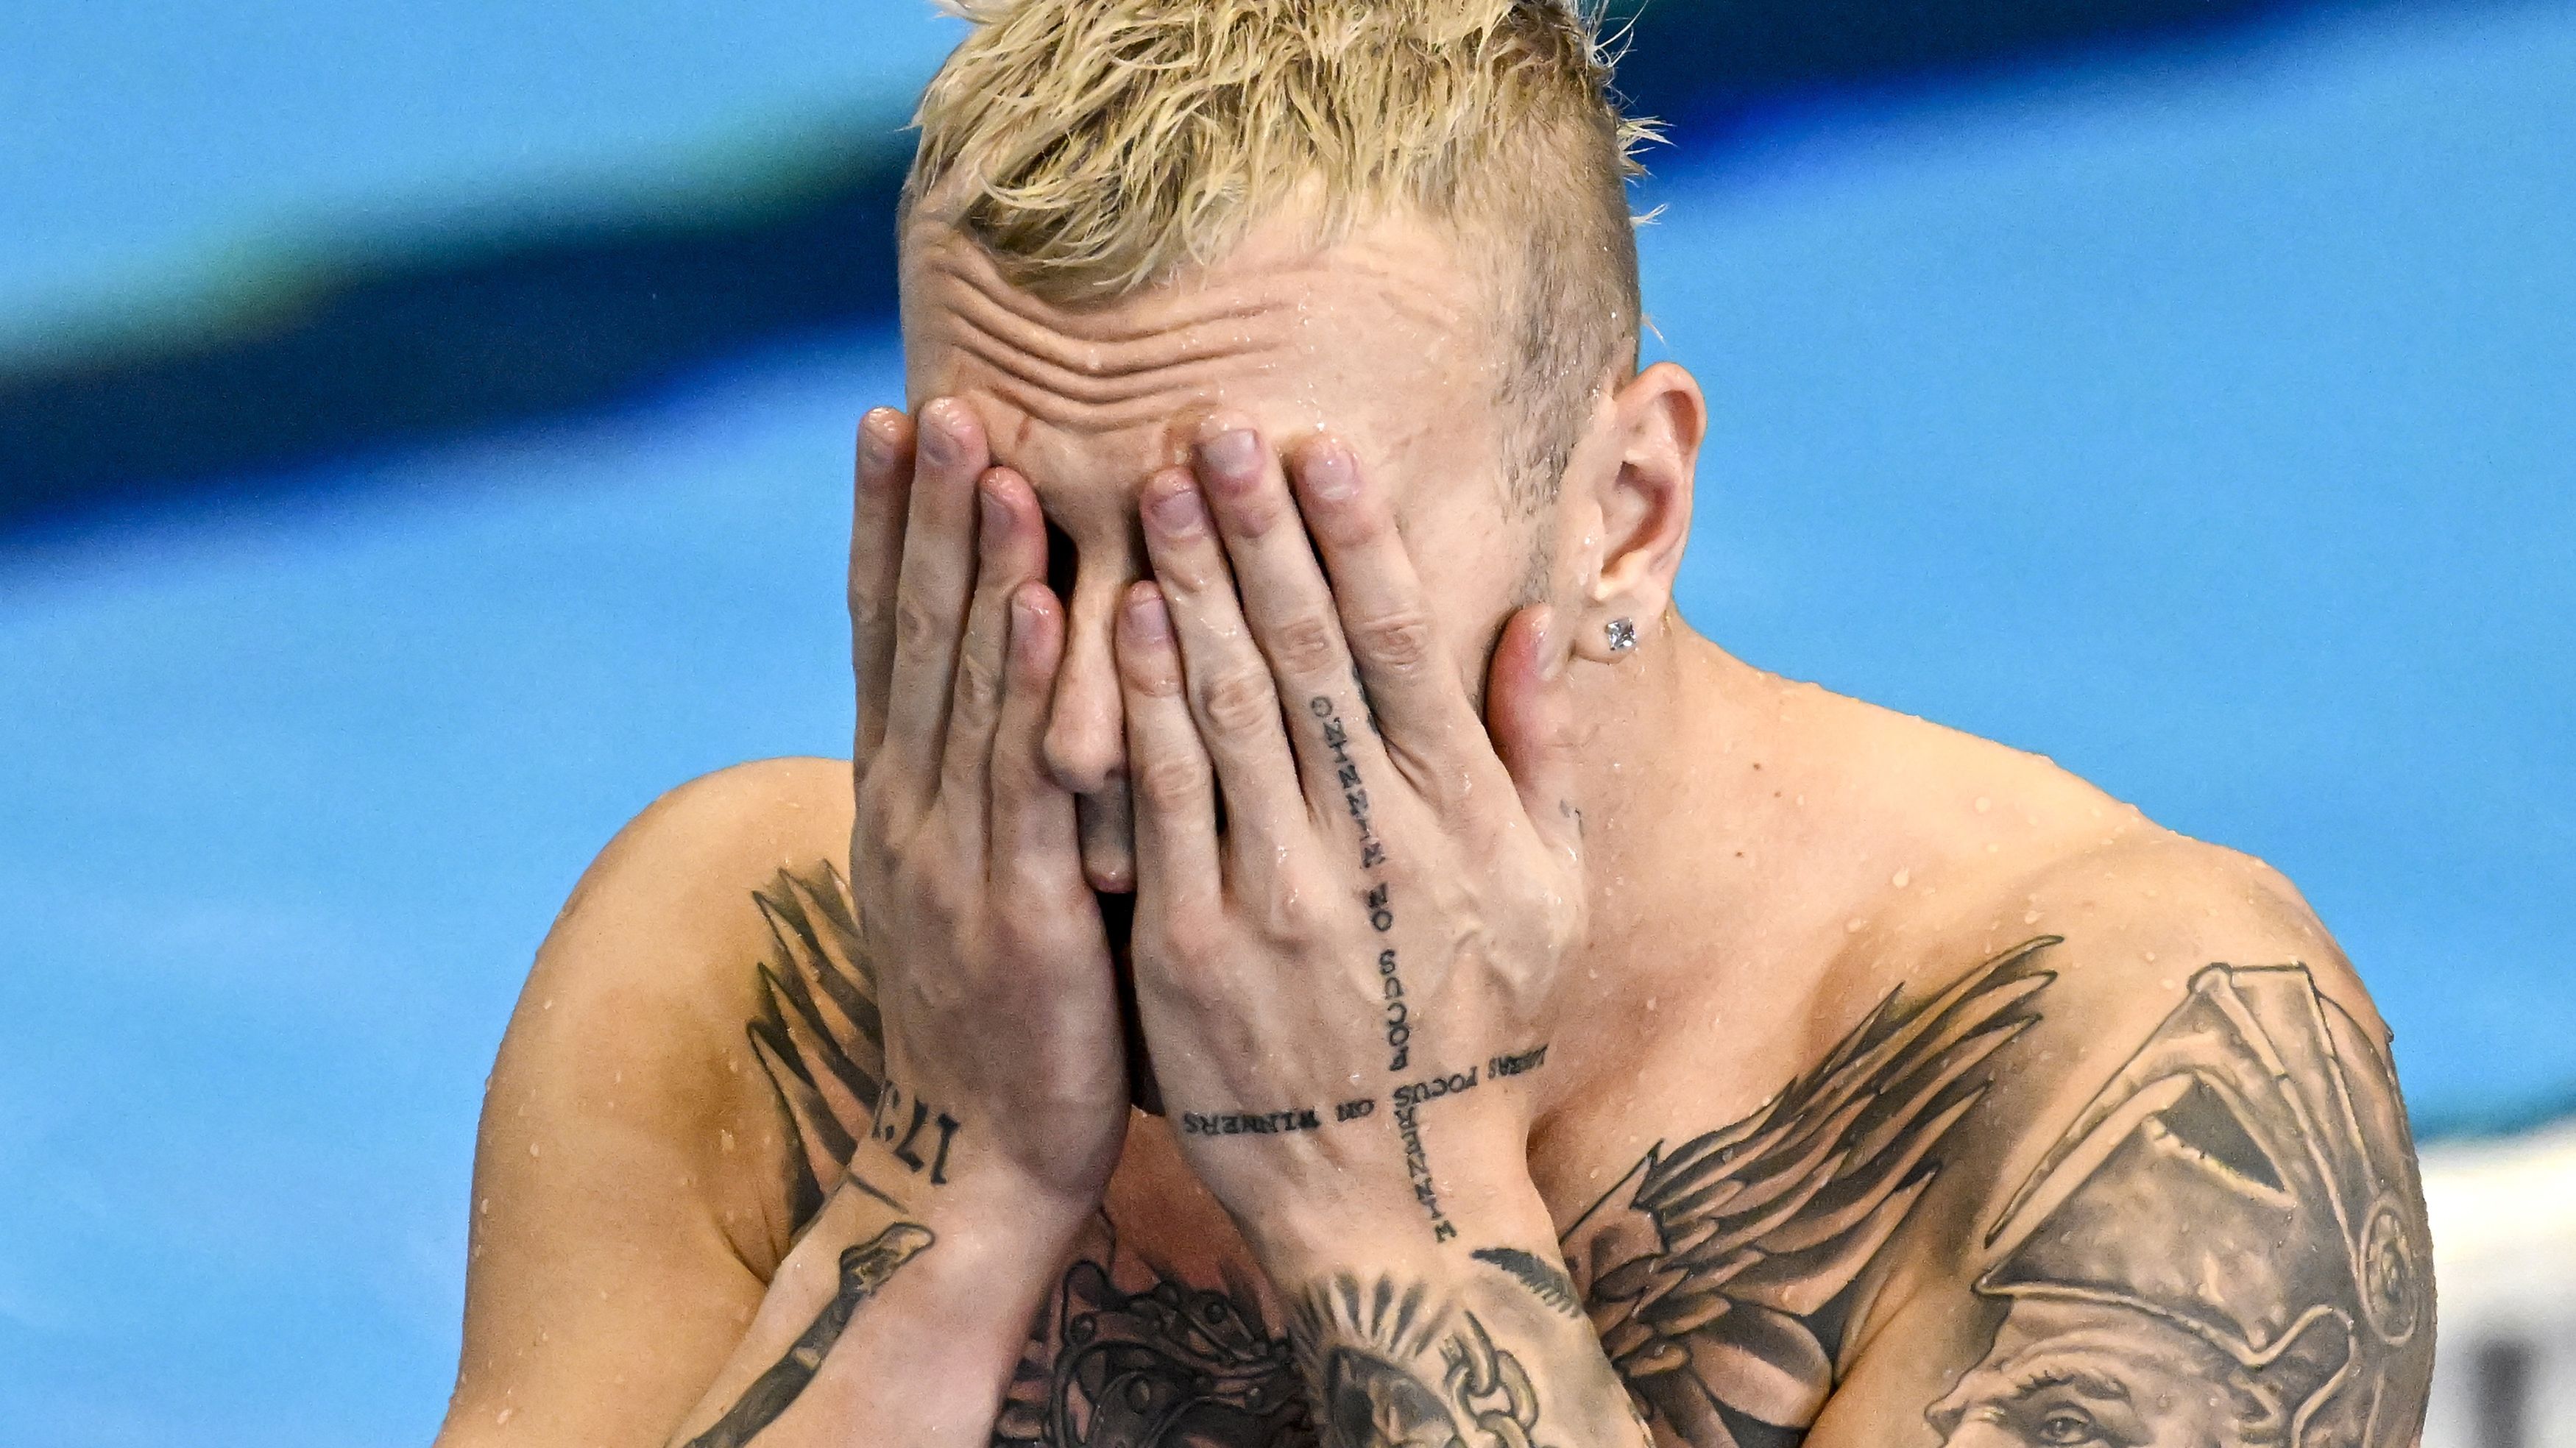 Kyle Chalmers of Australia reacts after competing in the 100m Freestyle Men Final during the 20th World Aquatics Championships at the Marine Messe Hall A in Fukuoka (Japan), July 27rd, 2023. Kyle Chalmers placed first winning the gold medal